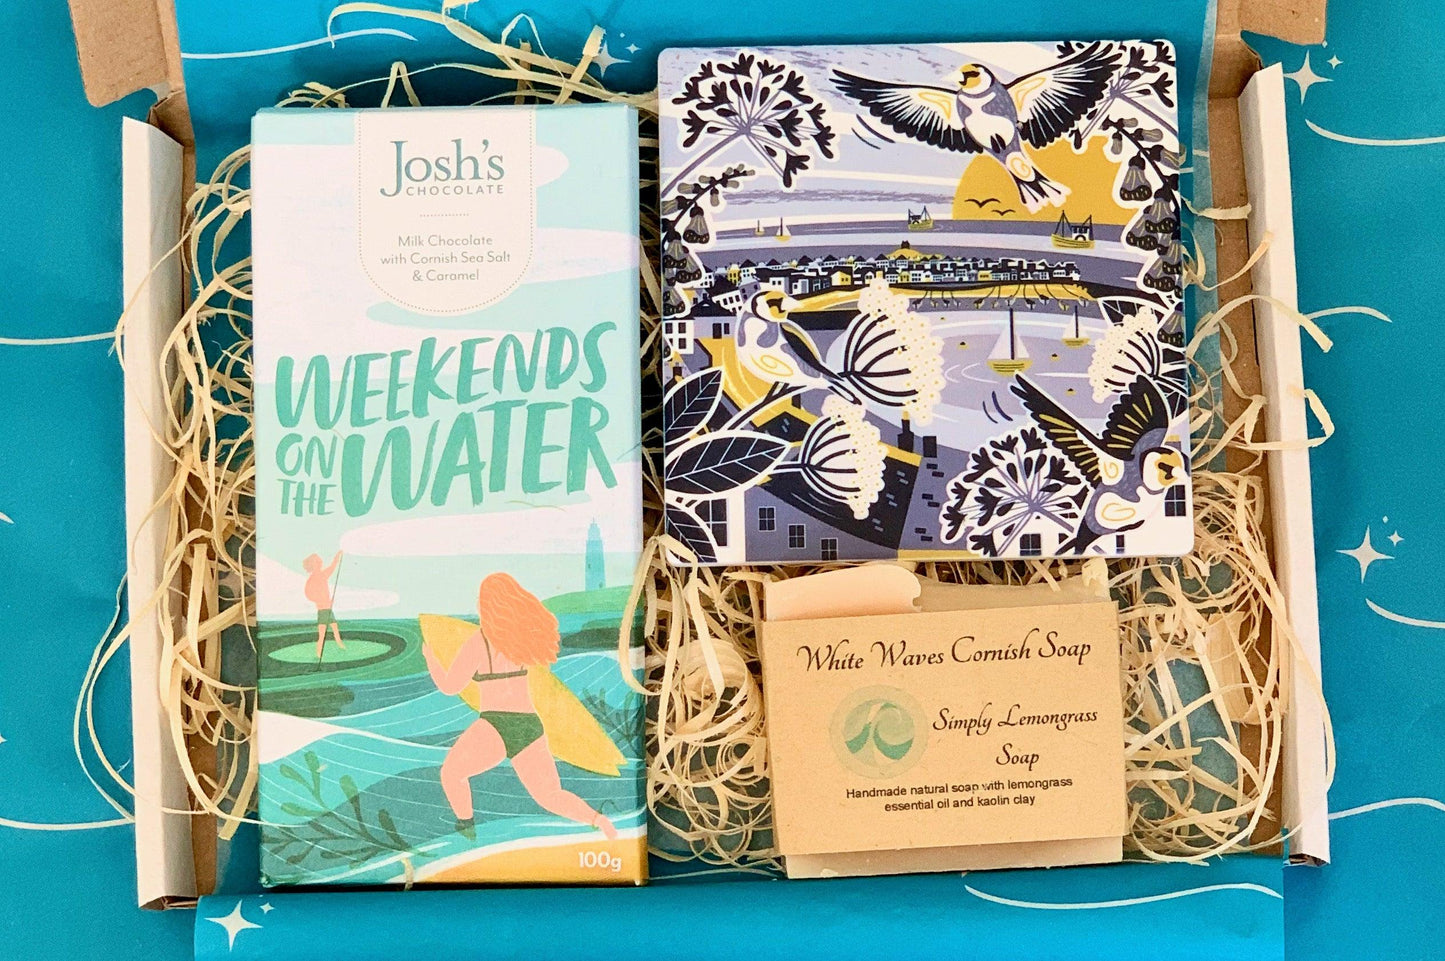 Sand and Sparkles Cornish Letterbox Gift Set with Cornish Illustrated coaster, natural Cornish soap and Cornish artisan chocolate